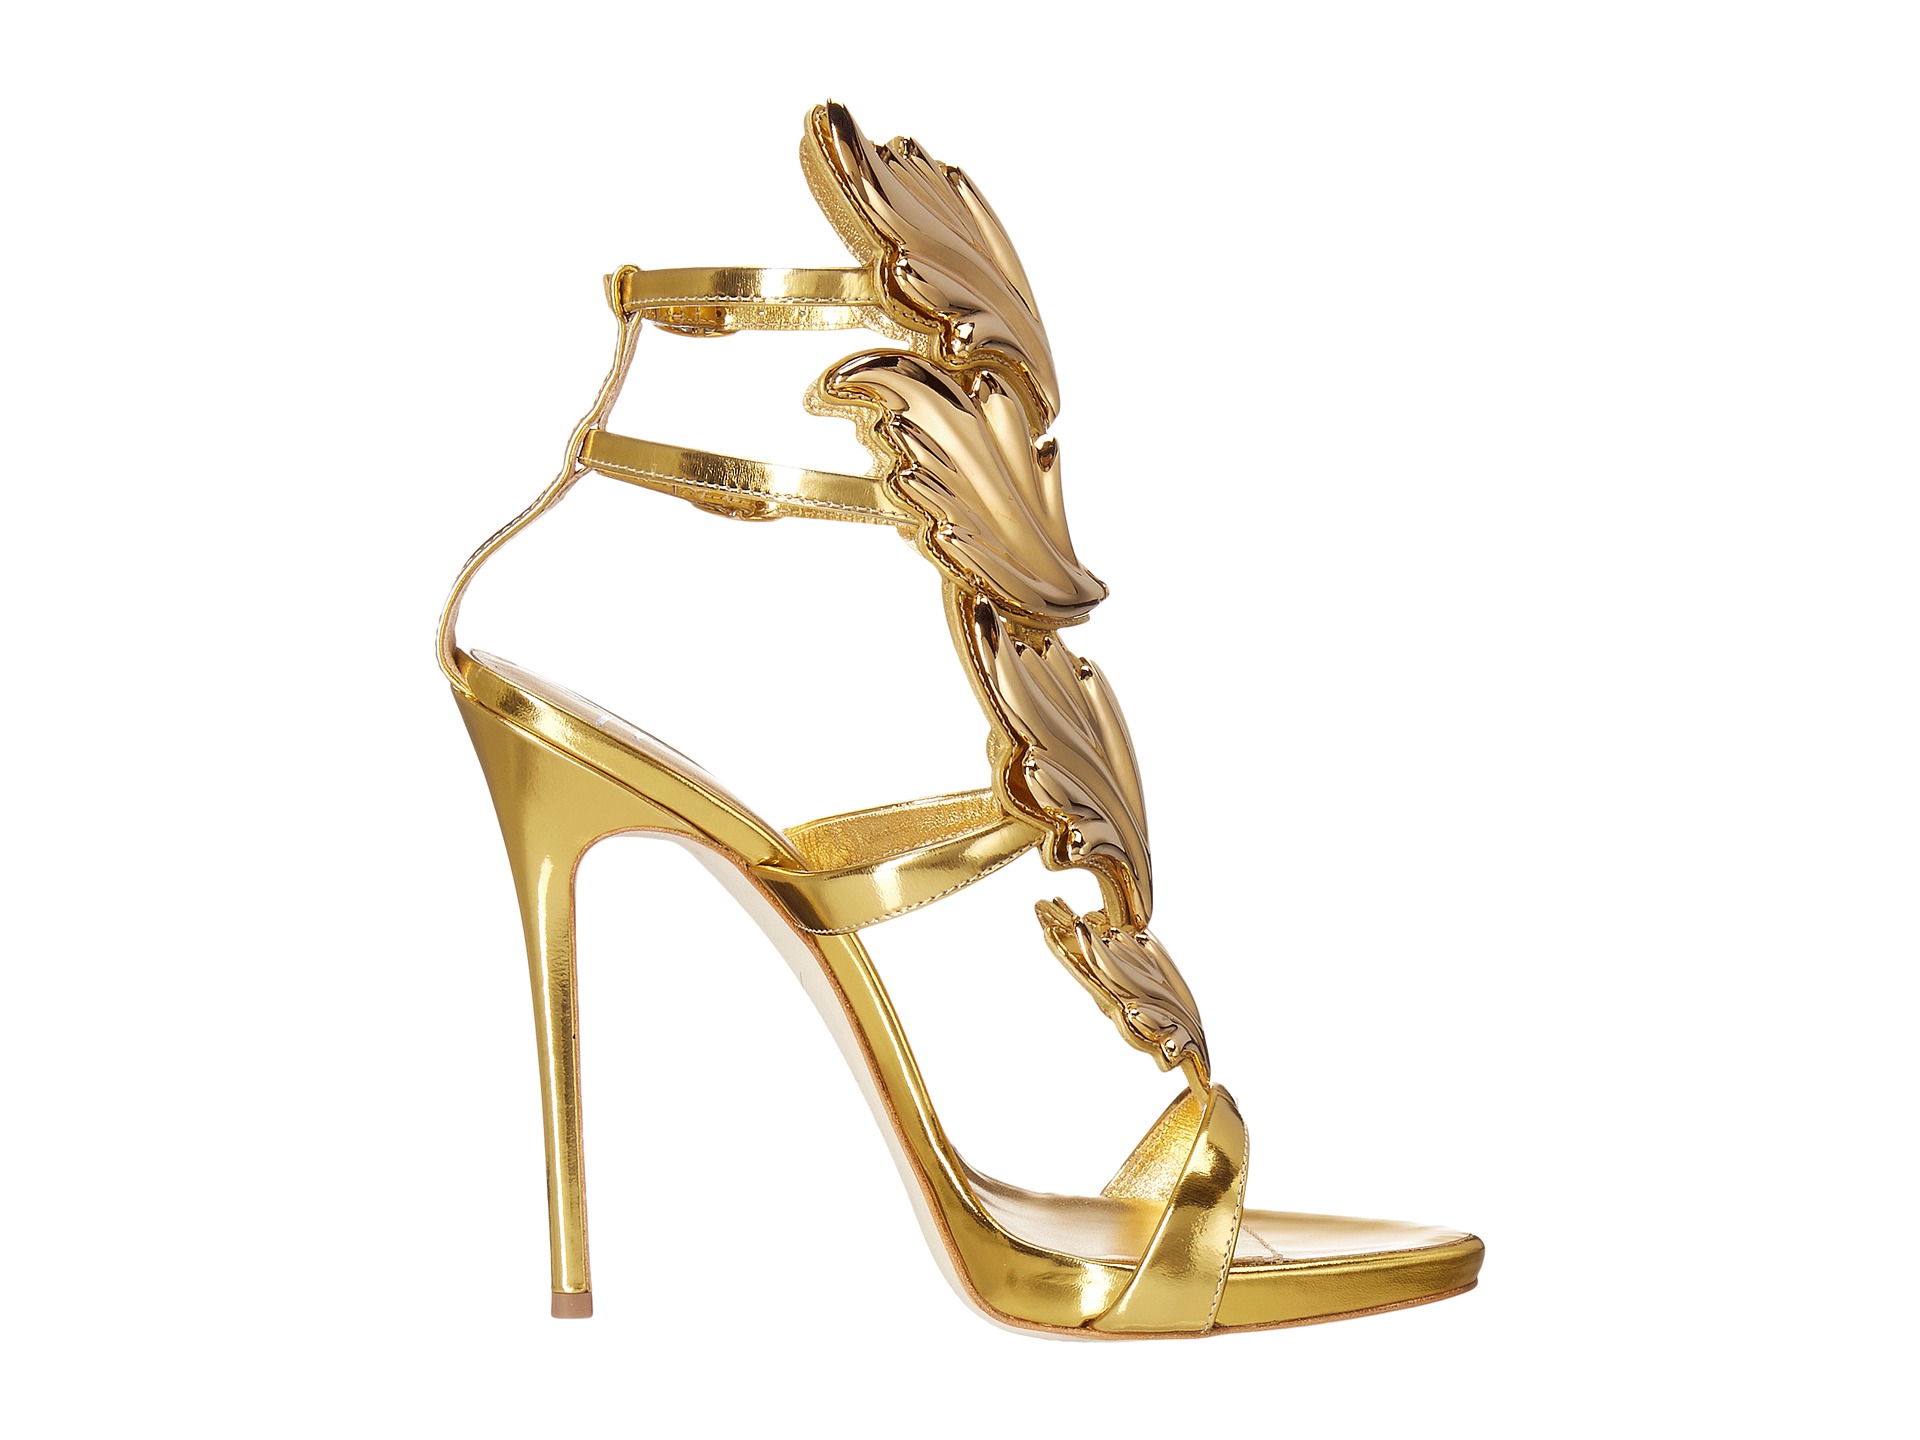 Giuseppe Zanotti Suede Winged Sandal at Zappos.com